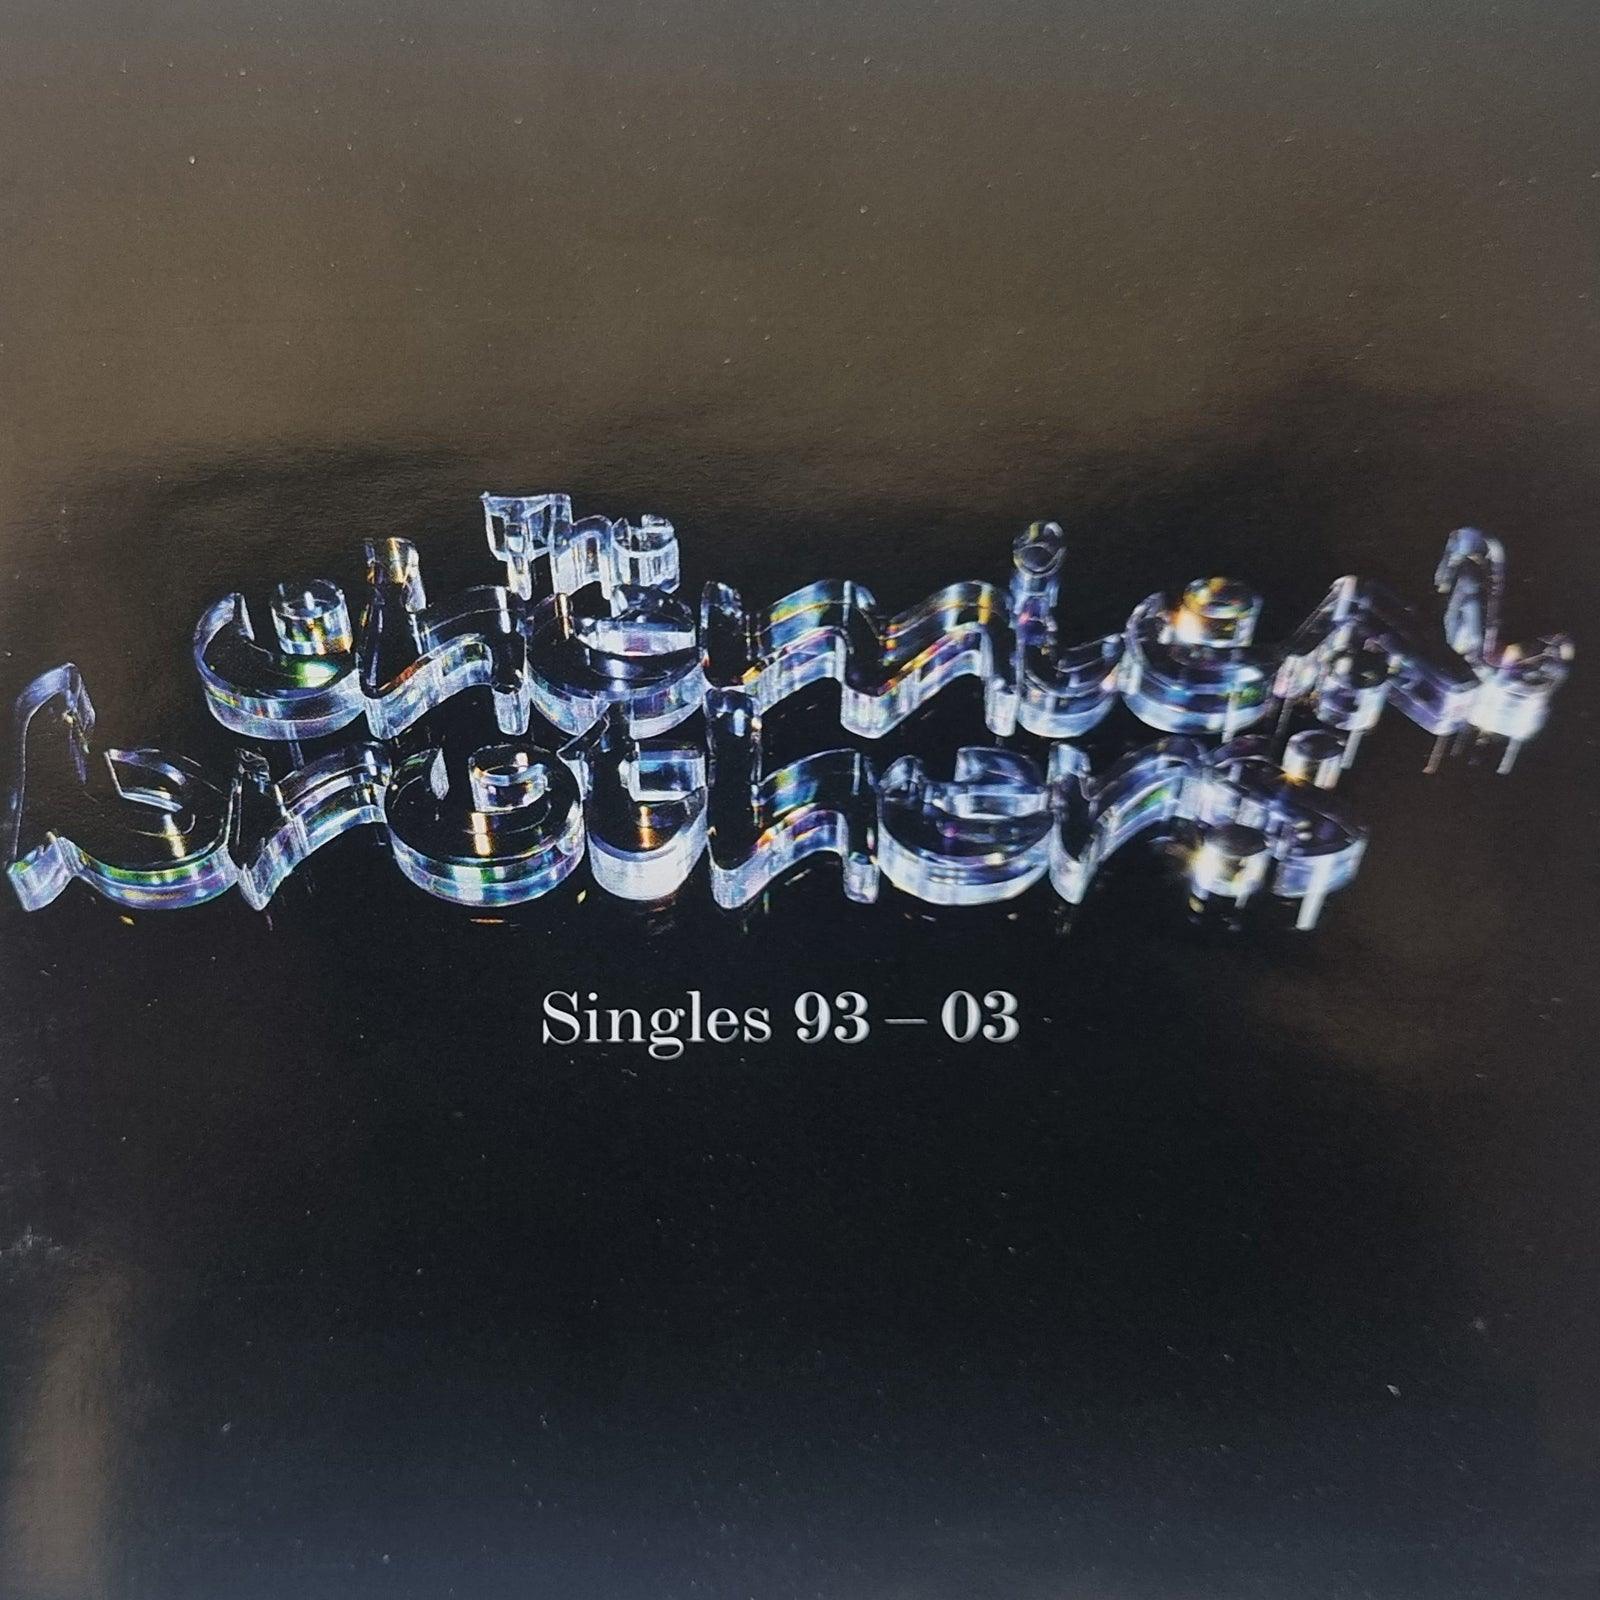 The Chemical Brothers - Singles 93 - 03 (CD)